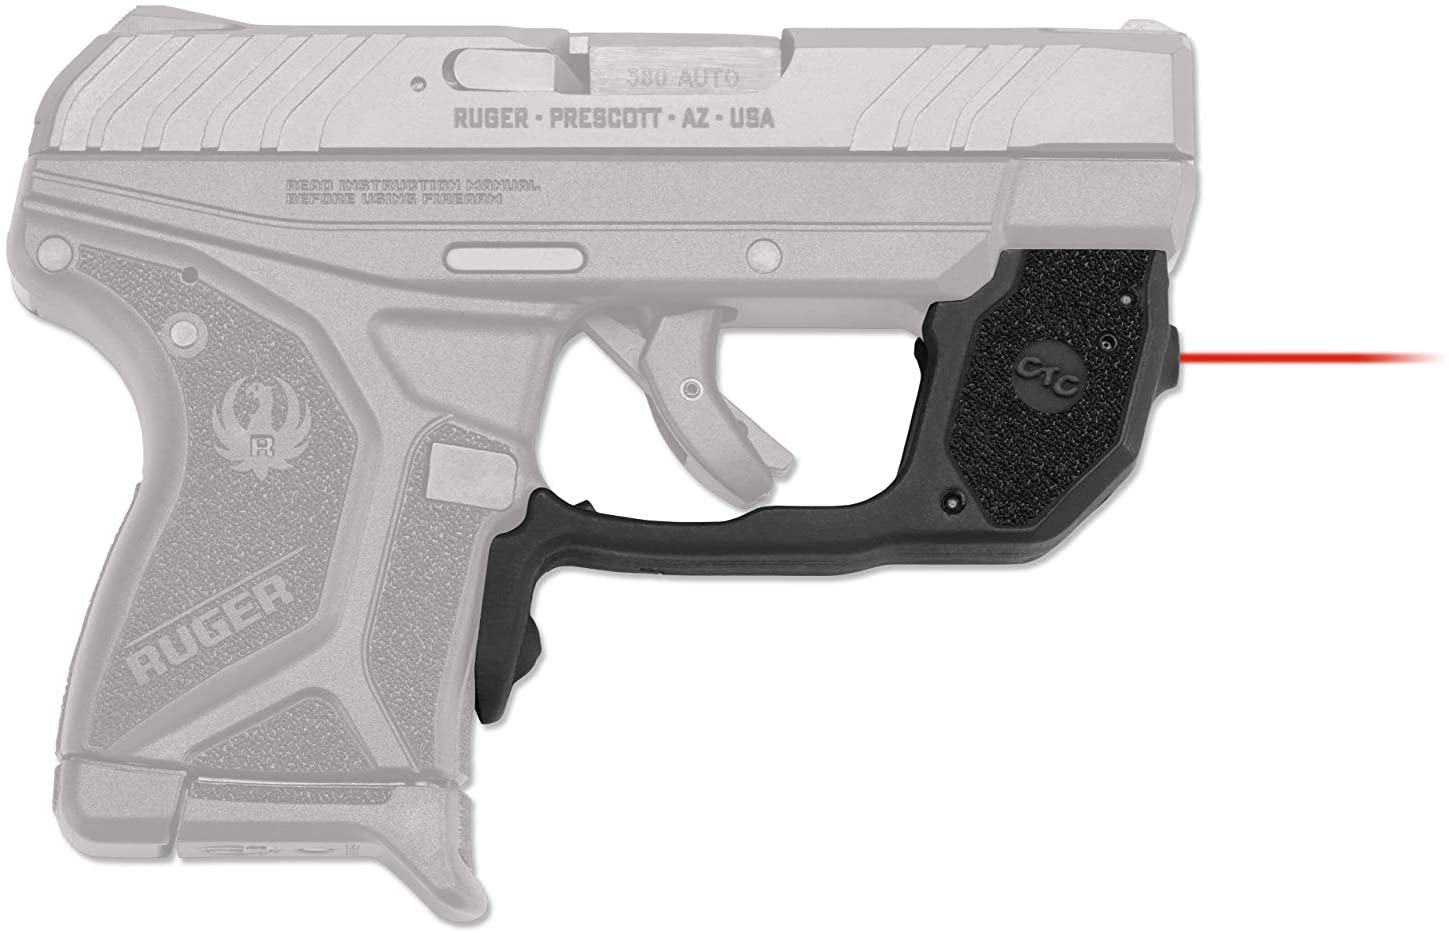 Crimson Trace LG-497 for Ruger LCP II